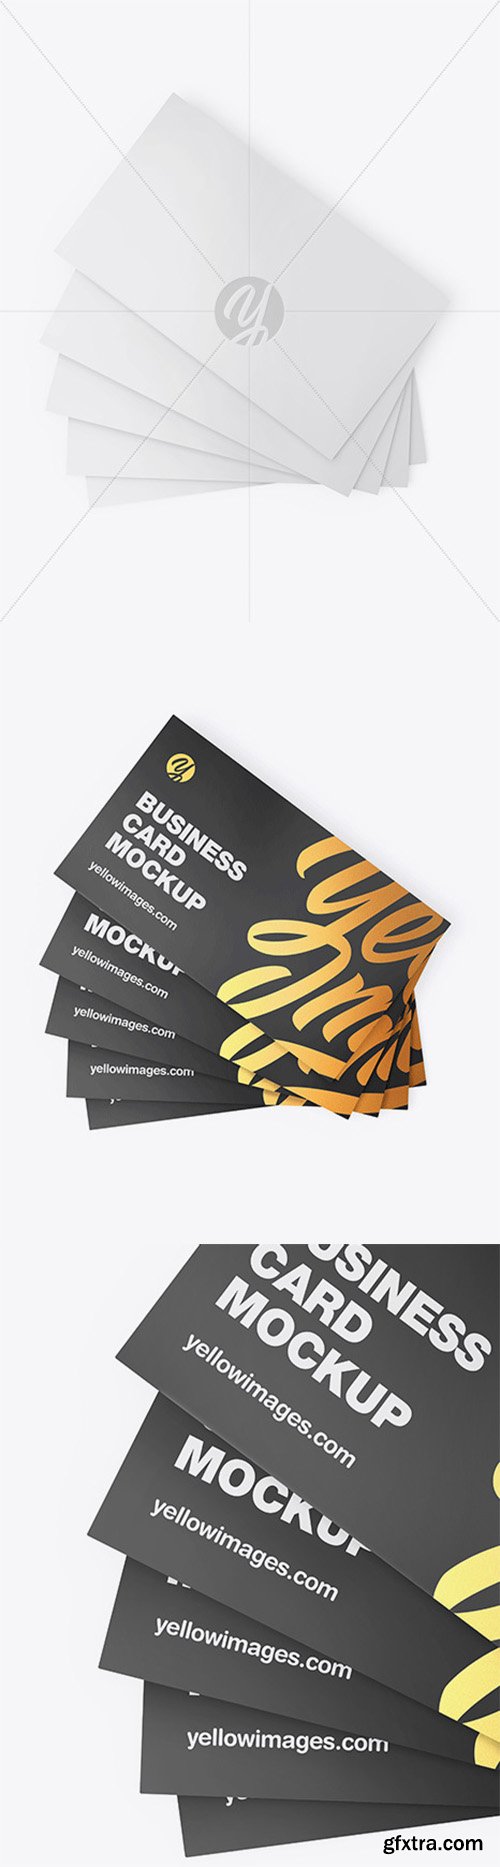 Business Cards Mockup 55237 Gfxtra